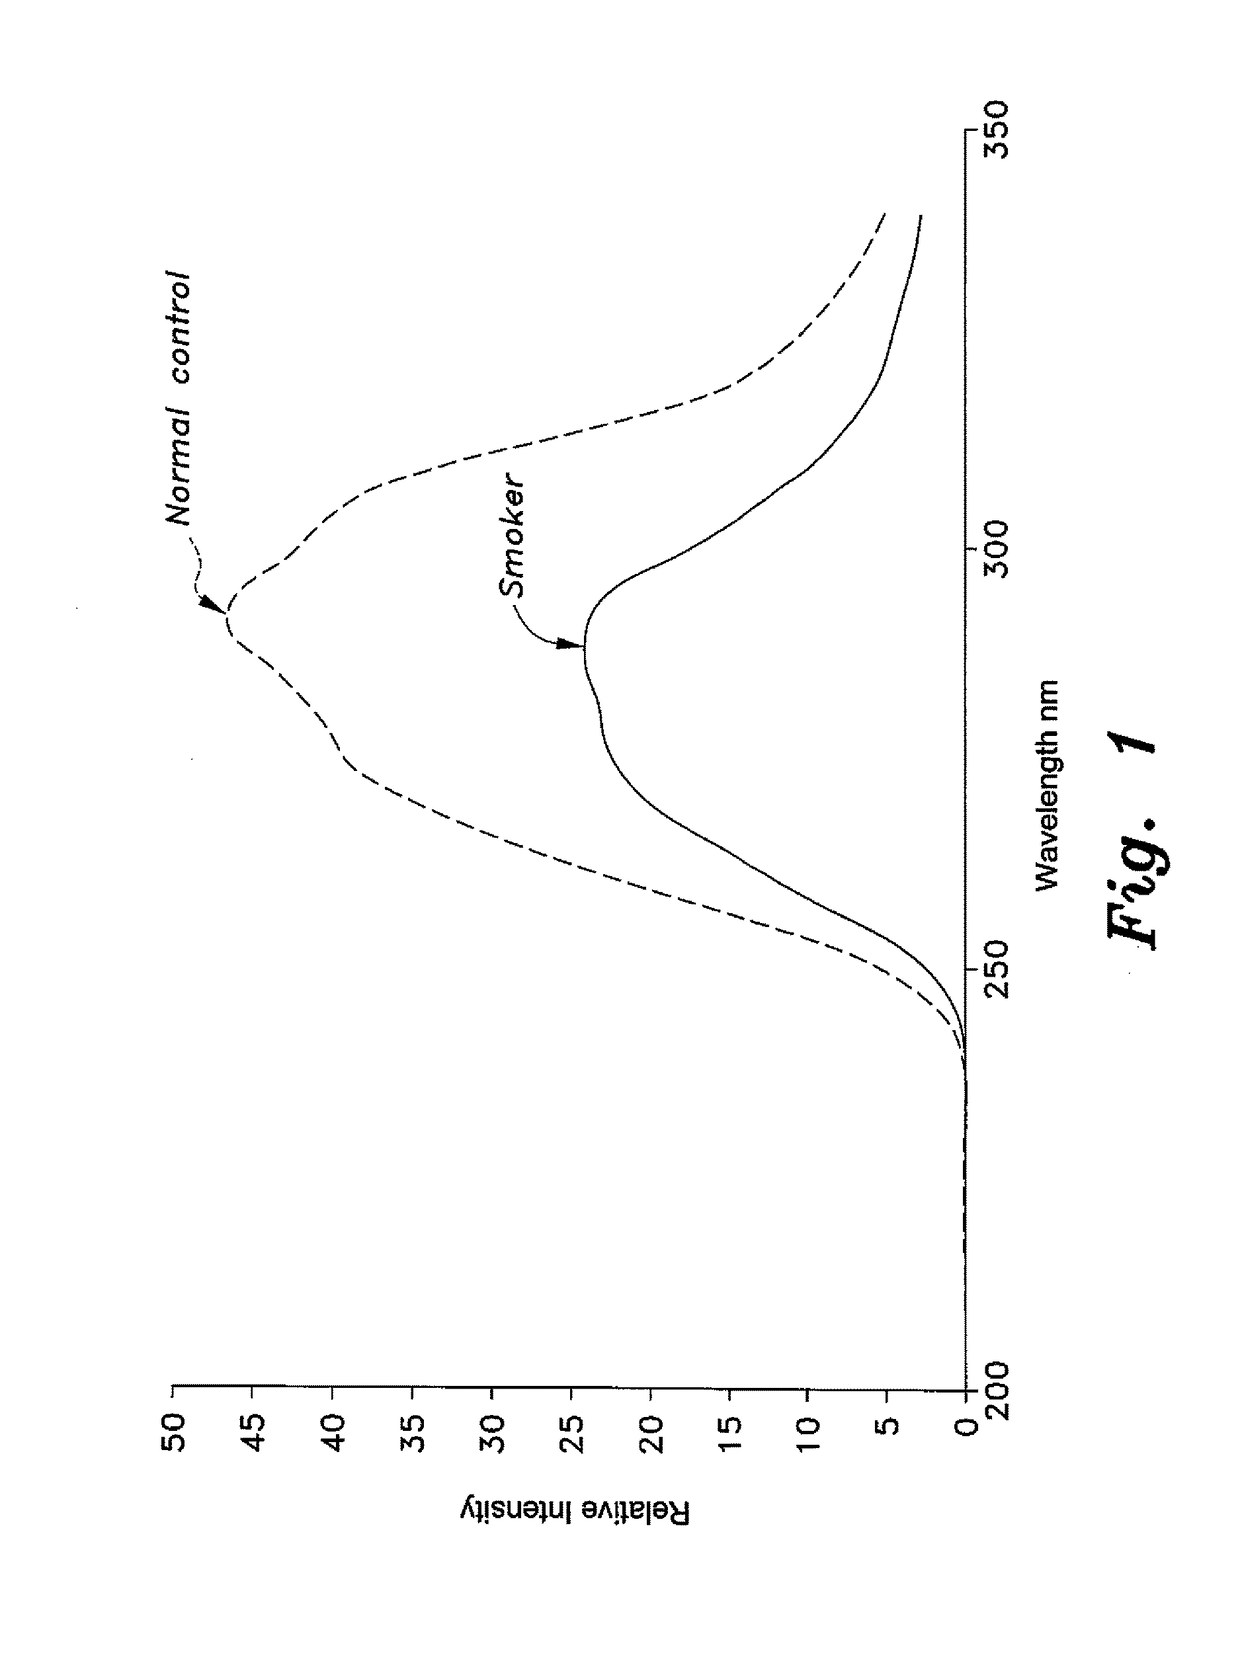 Spectral method for quantifying hemoglobin fragility caused by smoking